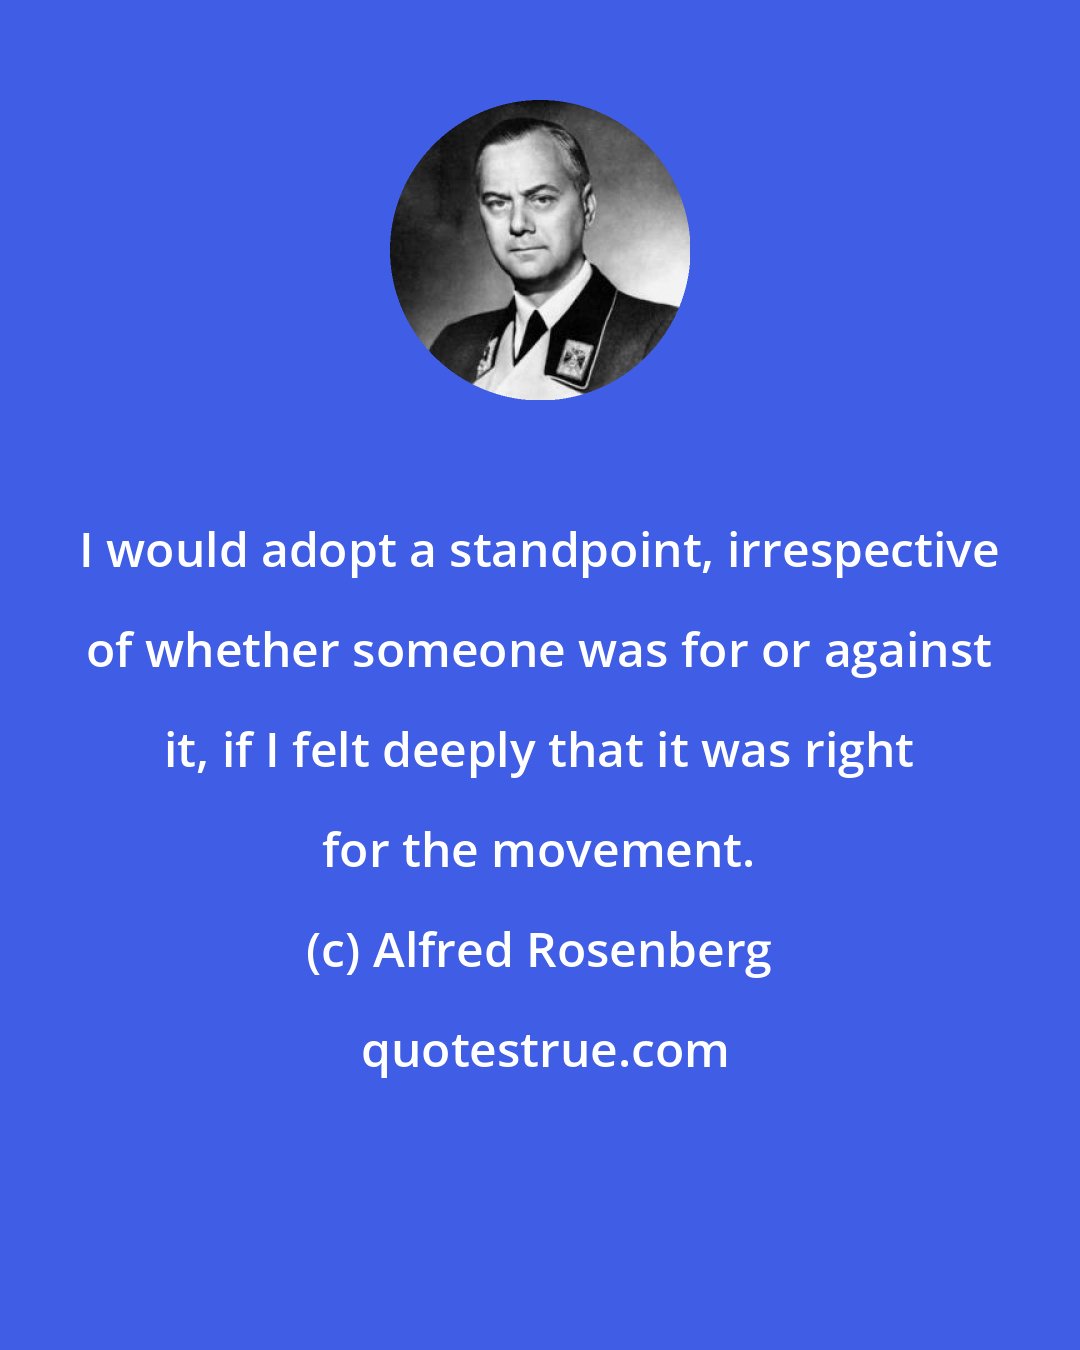 Alfred Rosenberg: I would adopt a standpoint, irrespective of whether someone was for or against it, if I felt deeply that it was right for the movement.